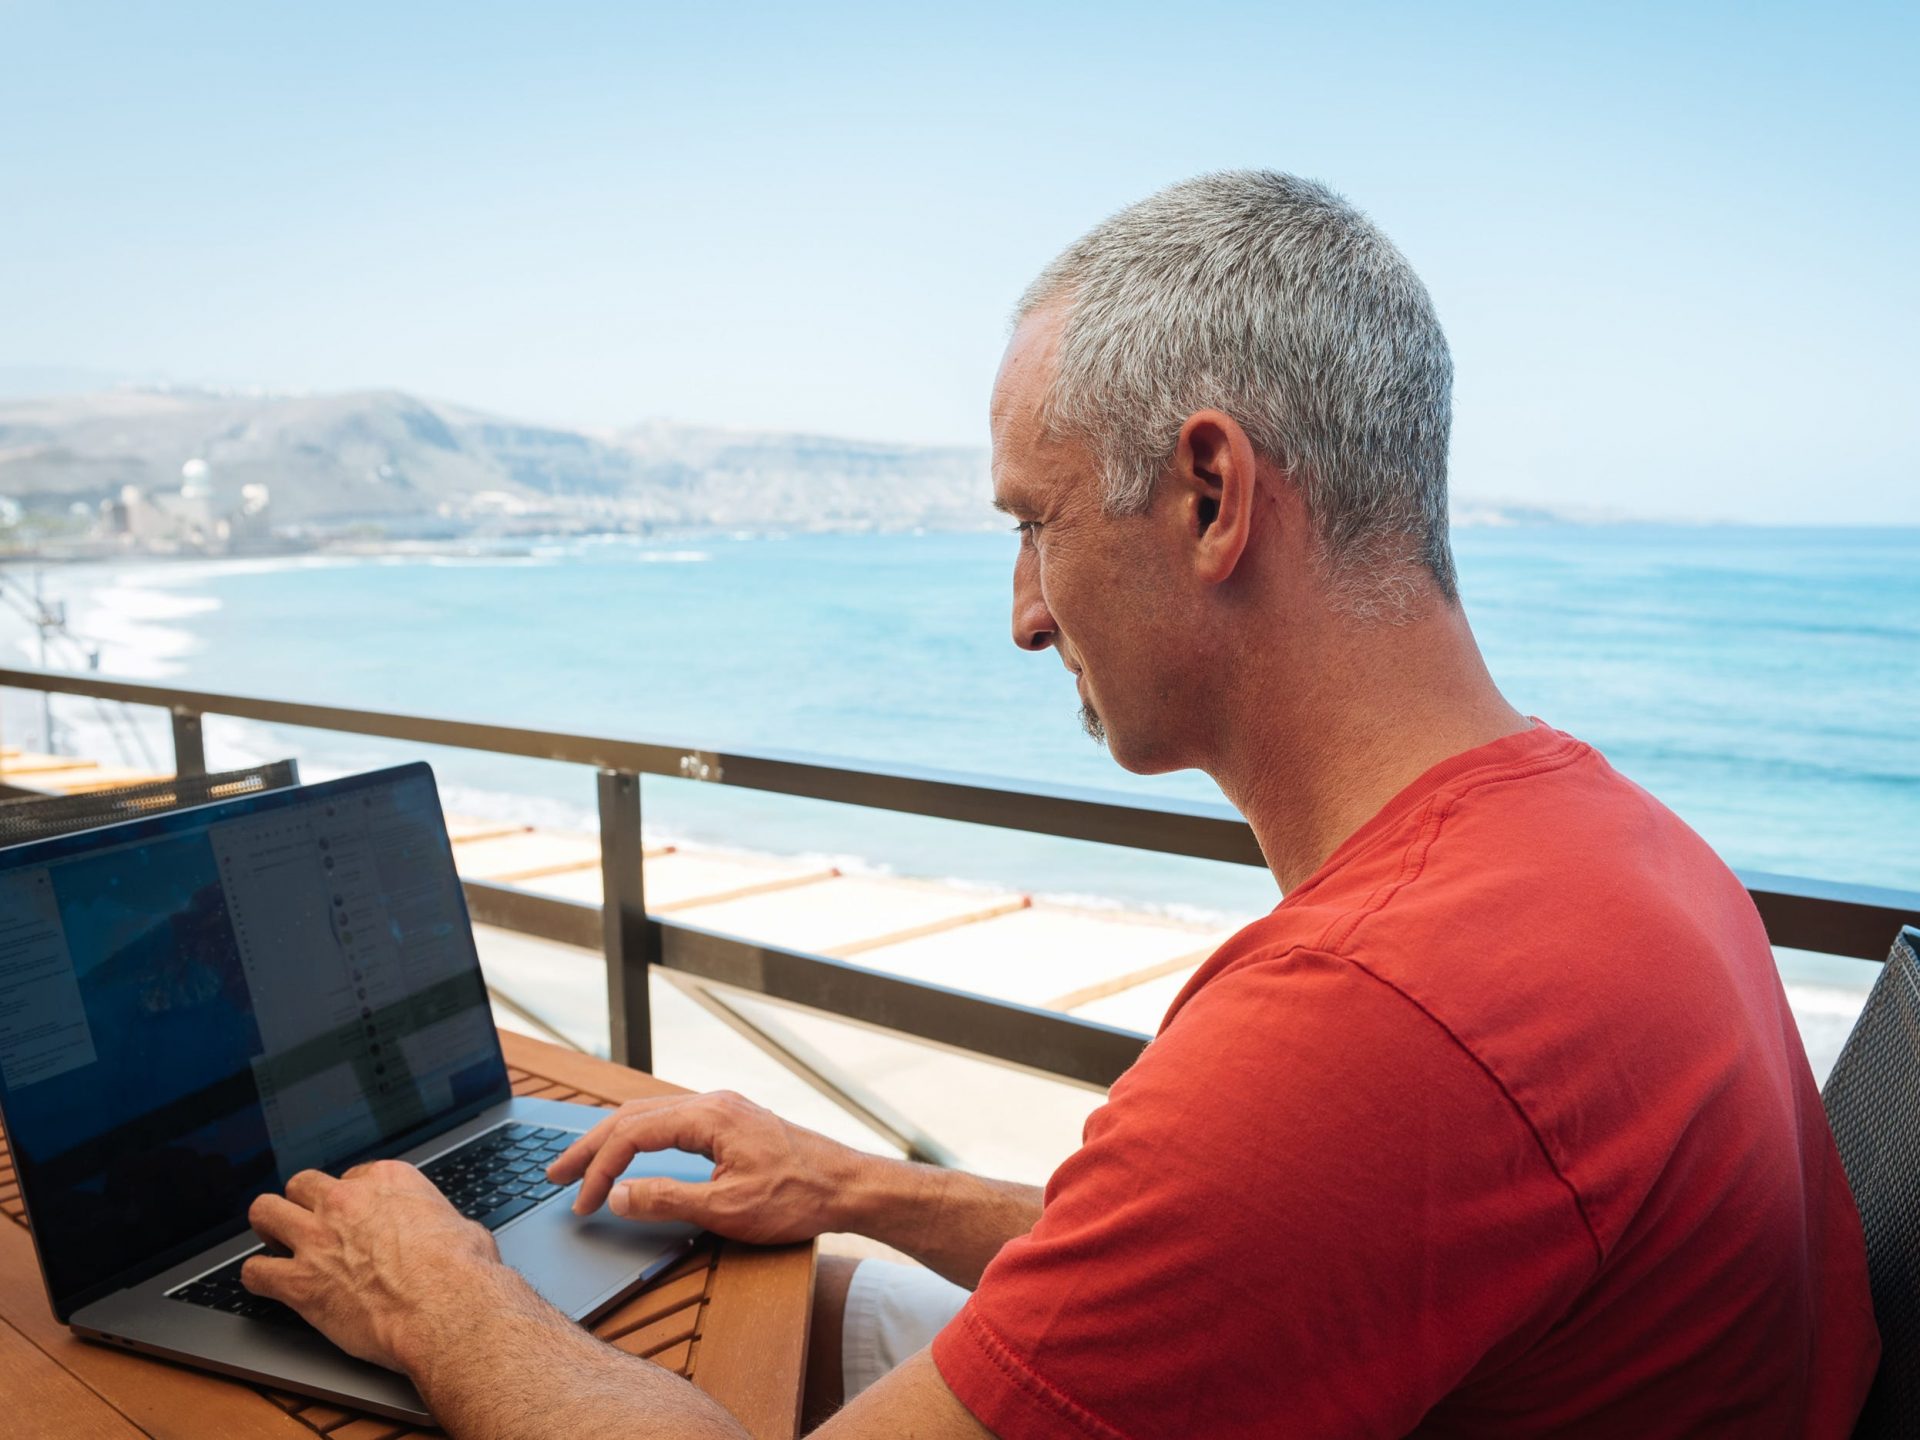 5 guidelines for working remotely wherever from the CEO who works by a seaside within the Canary Islands